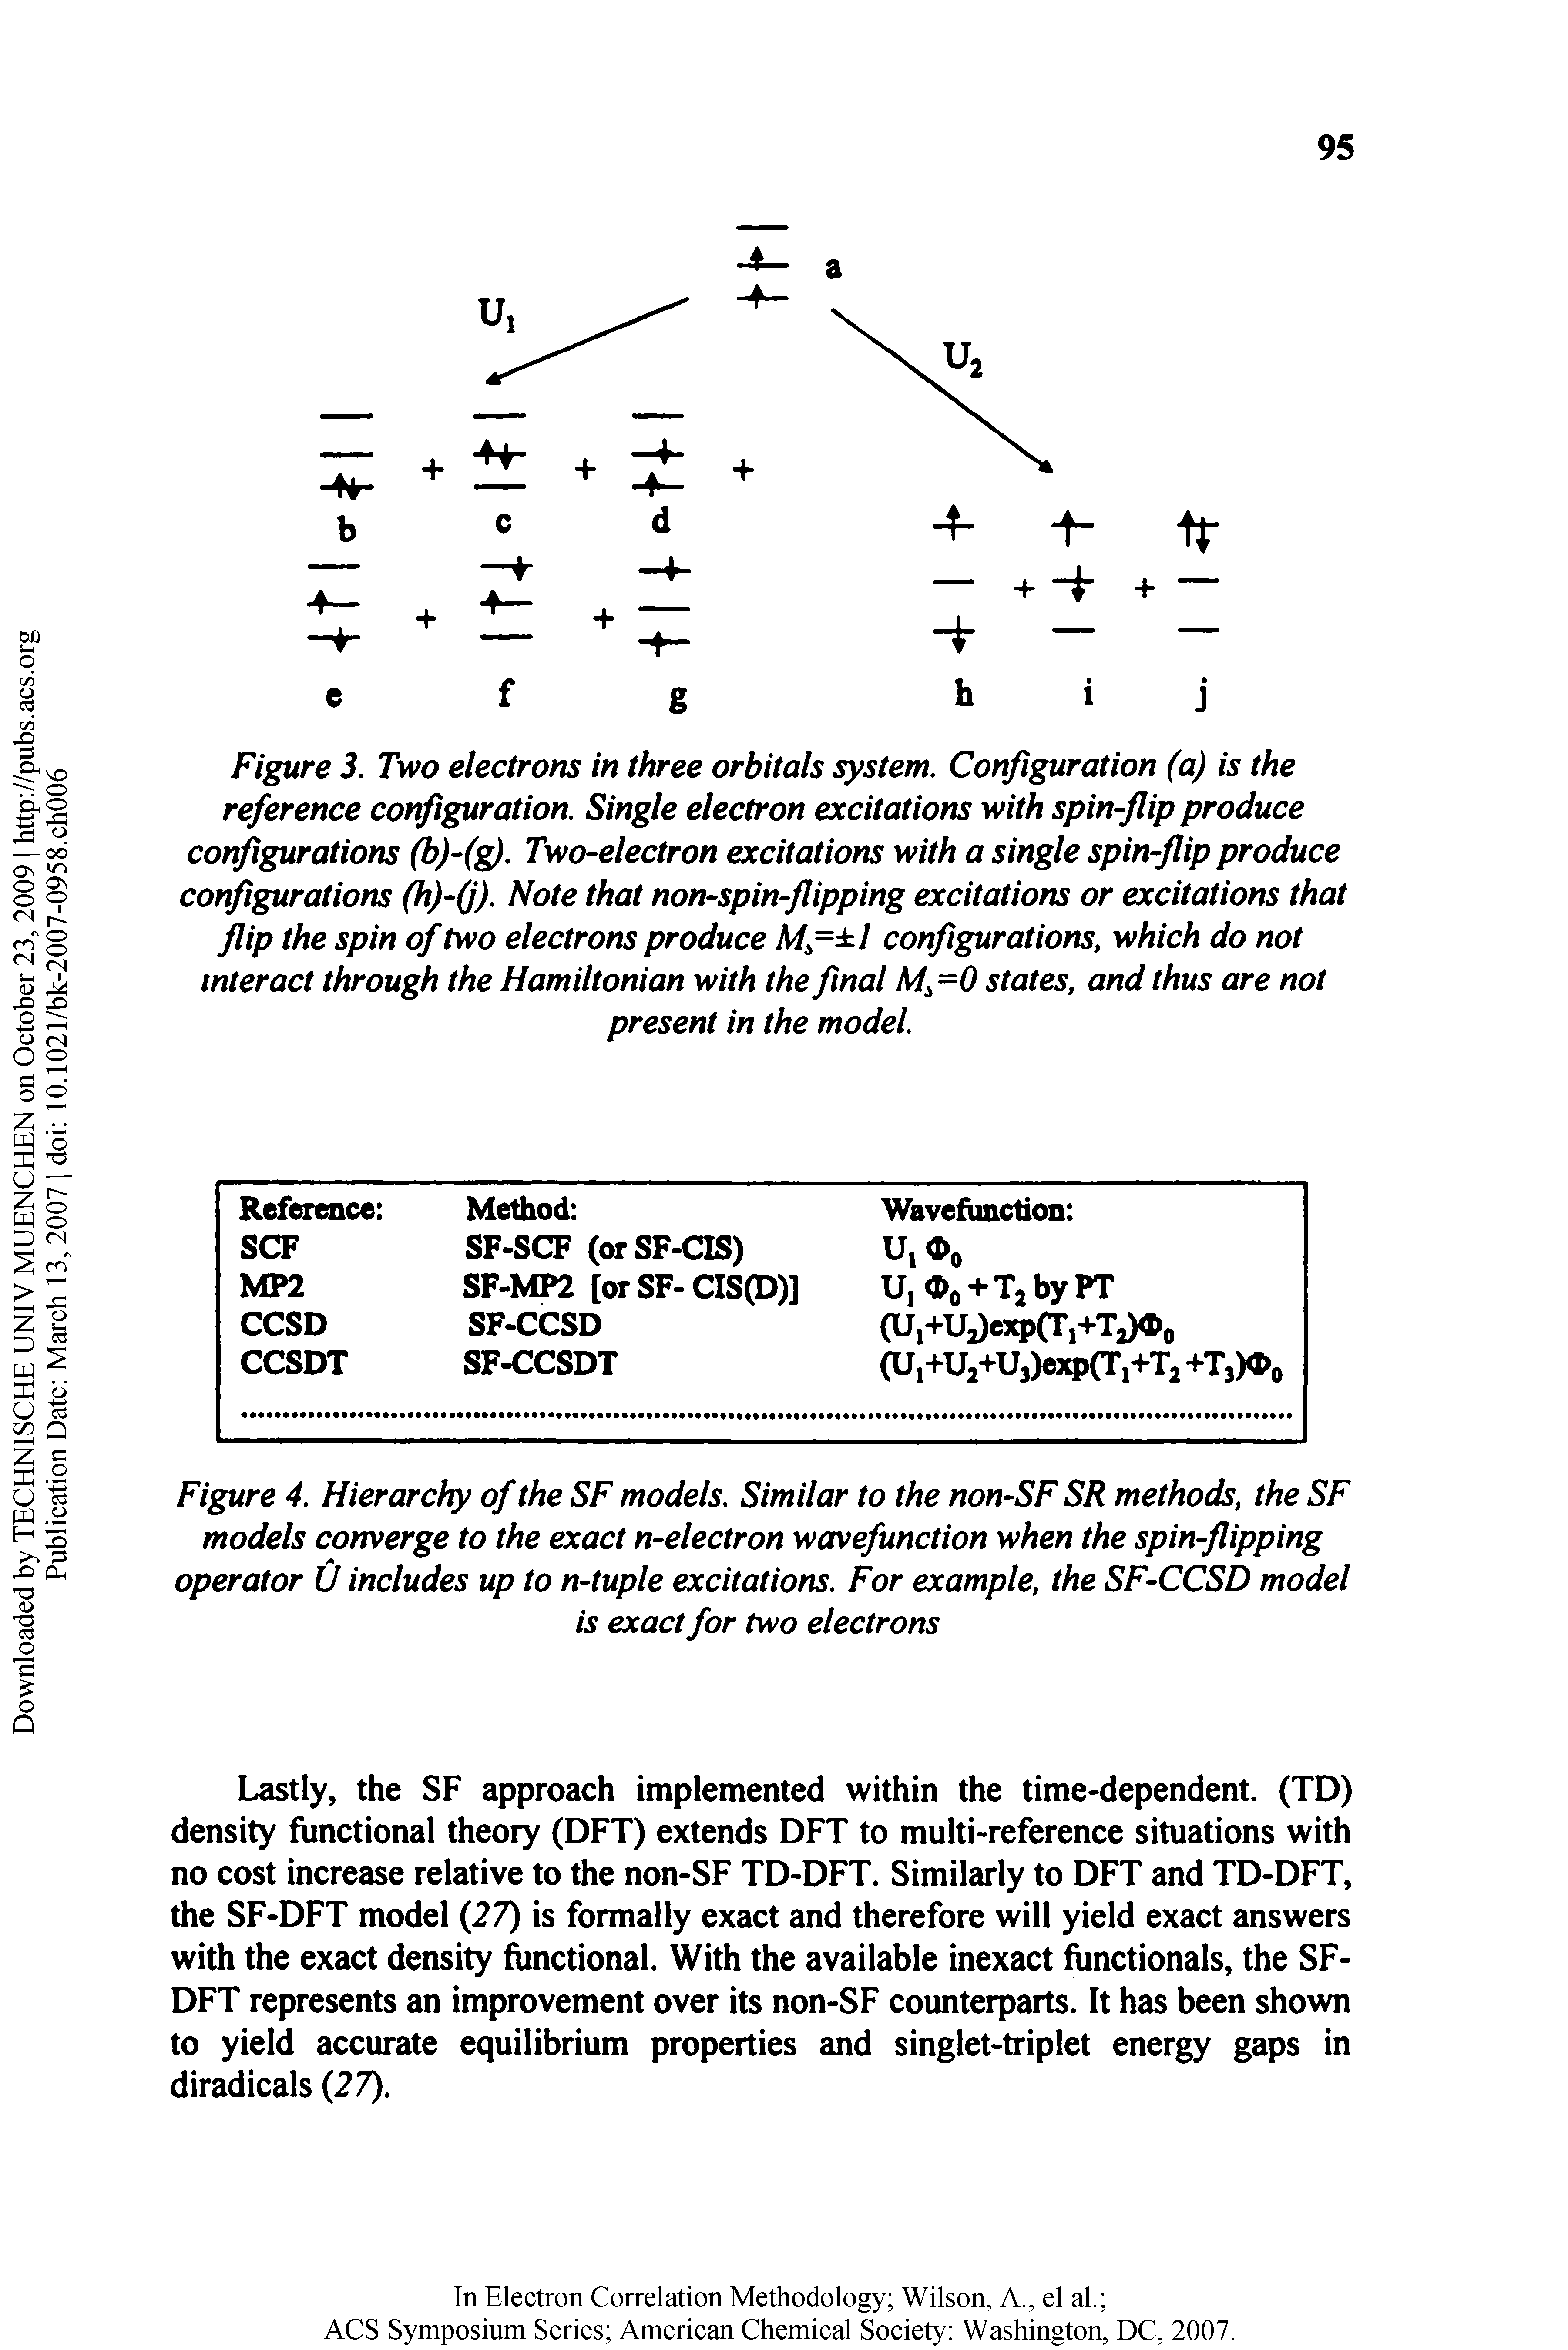 Figure 4. Hierarchy of the SF models. Similar to the non-SF SR methods, the SF models converge to the exact n-electron wavefunction when the spin-flipping operator 0 includes up to n-tuple excitations. For example, the SF-CCSD model...